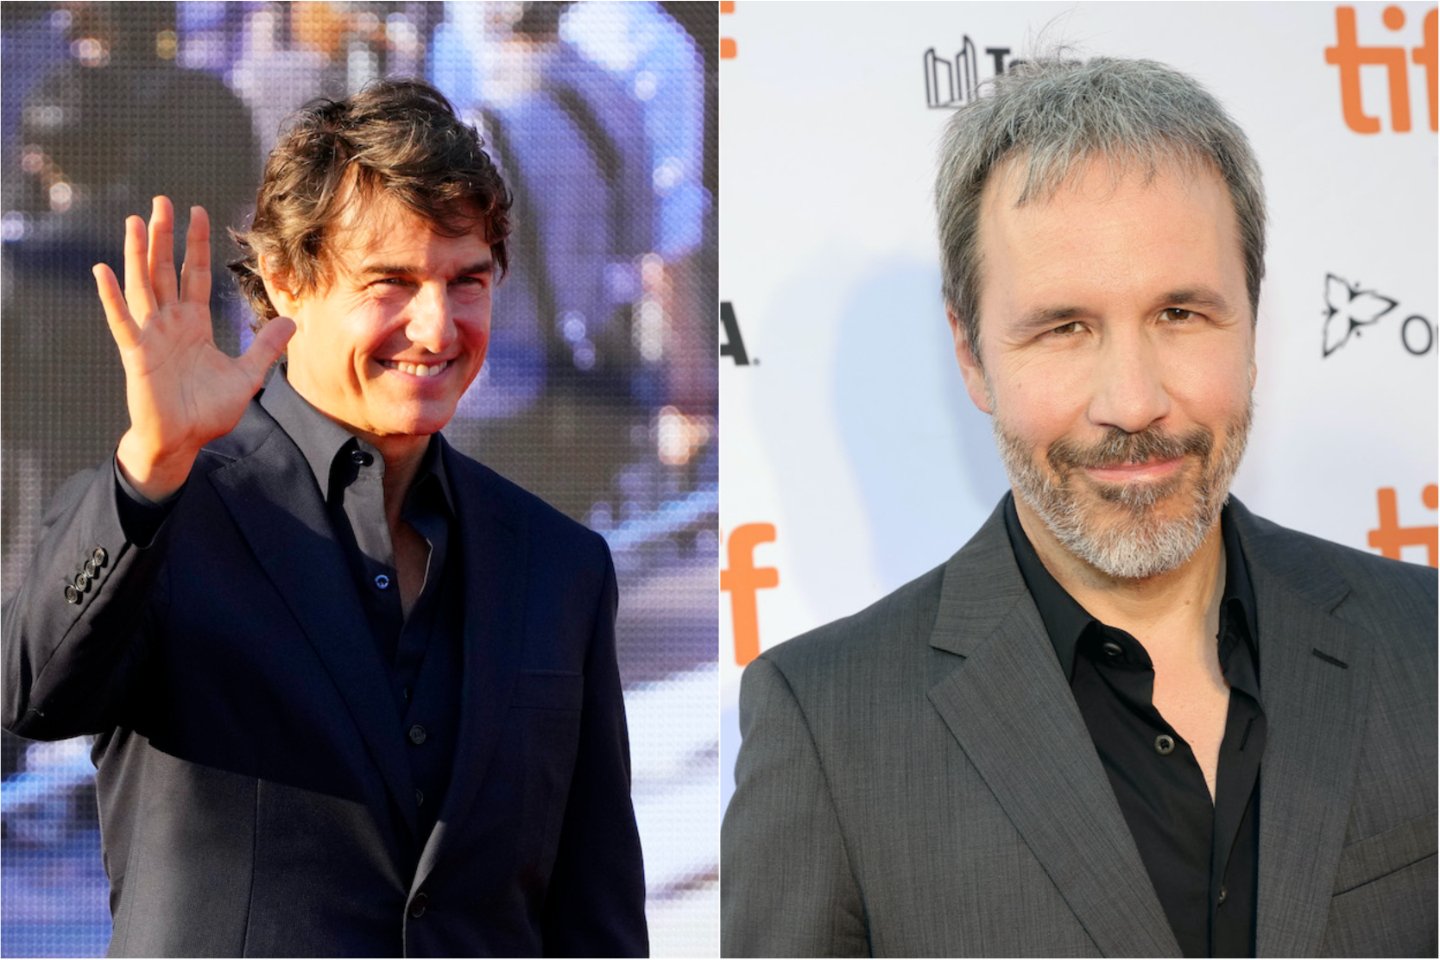 Tom Cruise (left) at the Japan premiere of 'Top Gun: Maverick,' Denis Villeneuve attends the 'Dune' premiere at the Toronto International Film Festival. The superstar Cruise and director Villeneuve have one thing in common when it comes to the films they make.